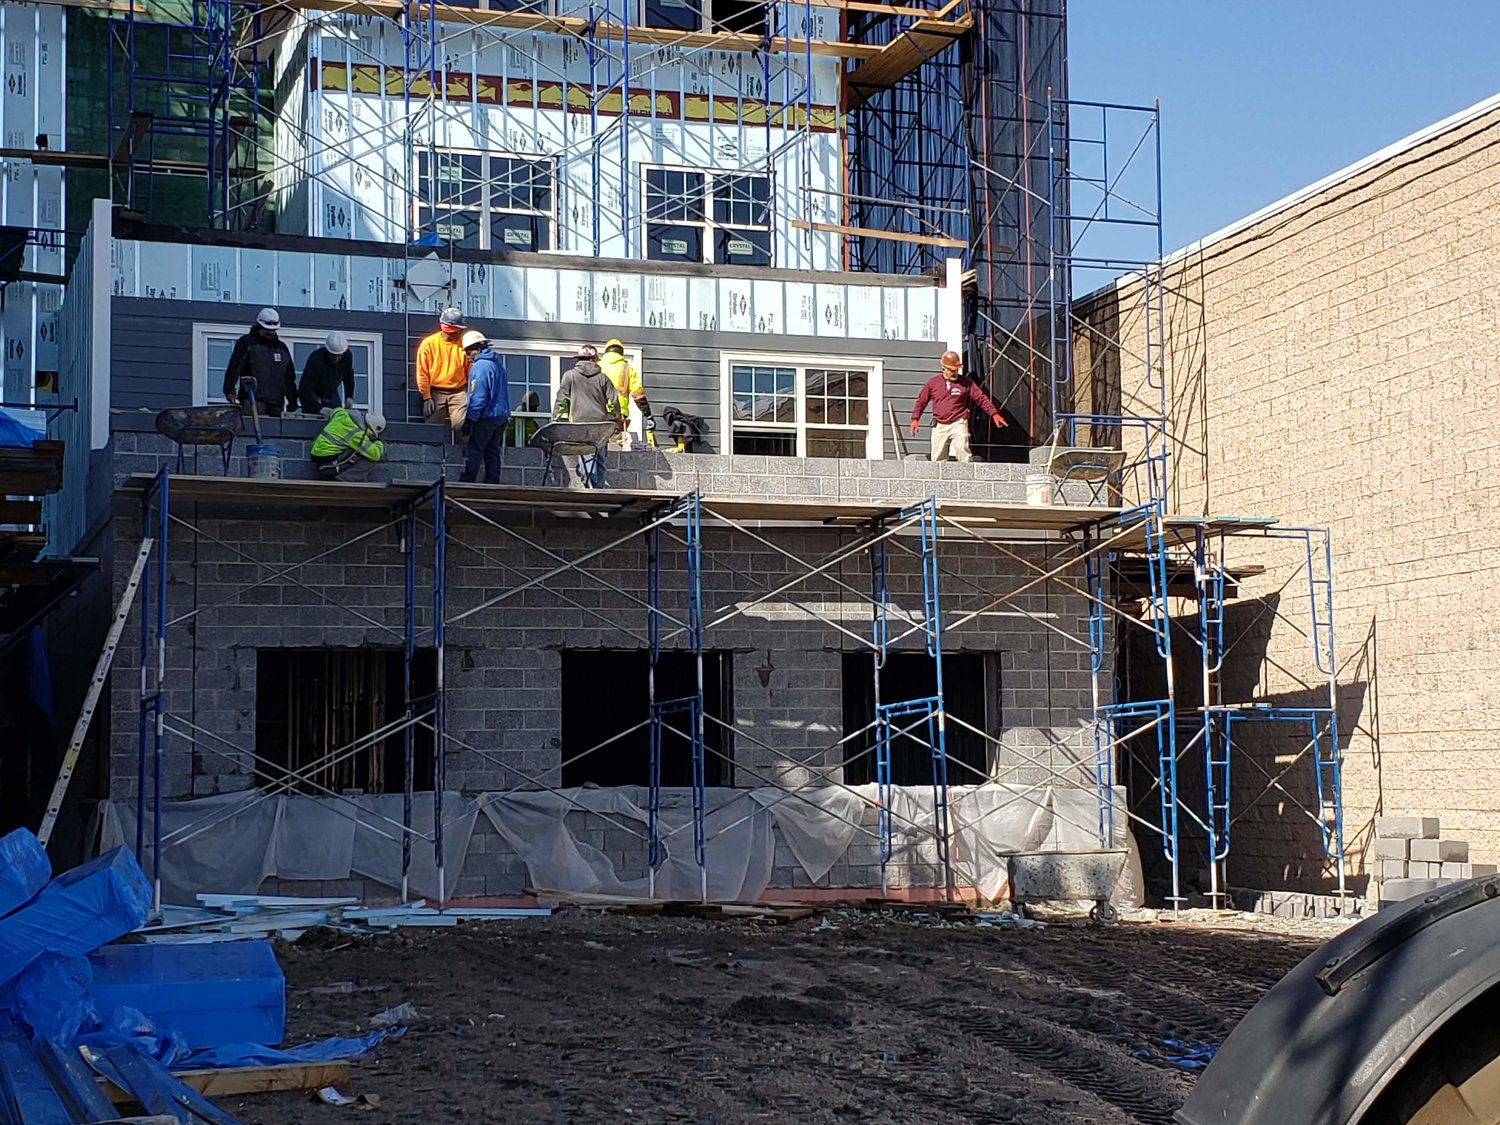 Construction workers were seen working on the new apartment building’s exterior.